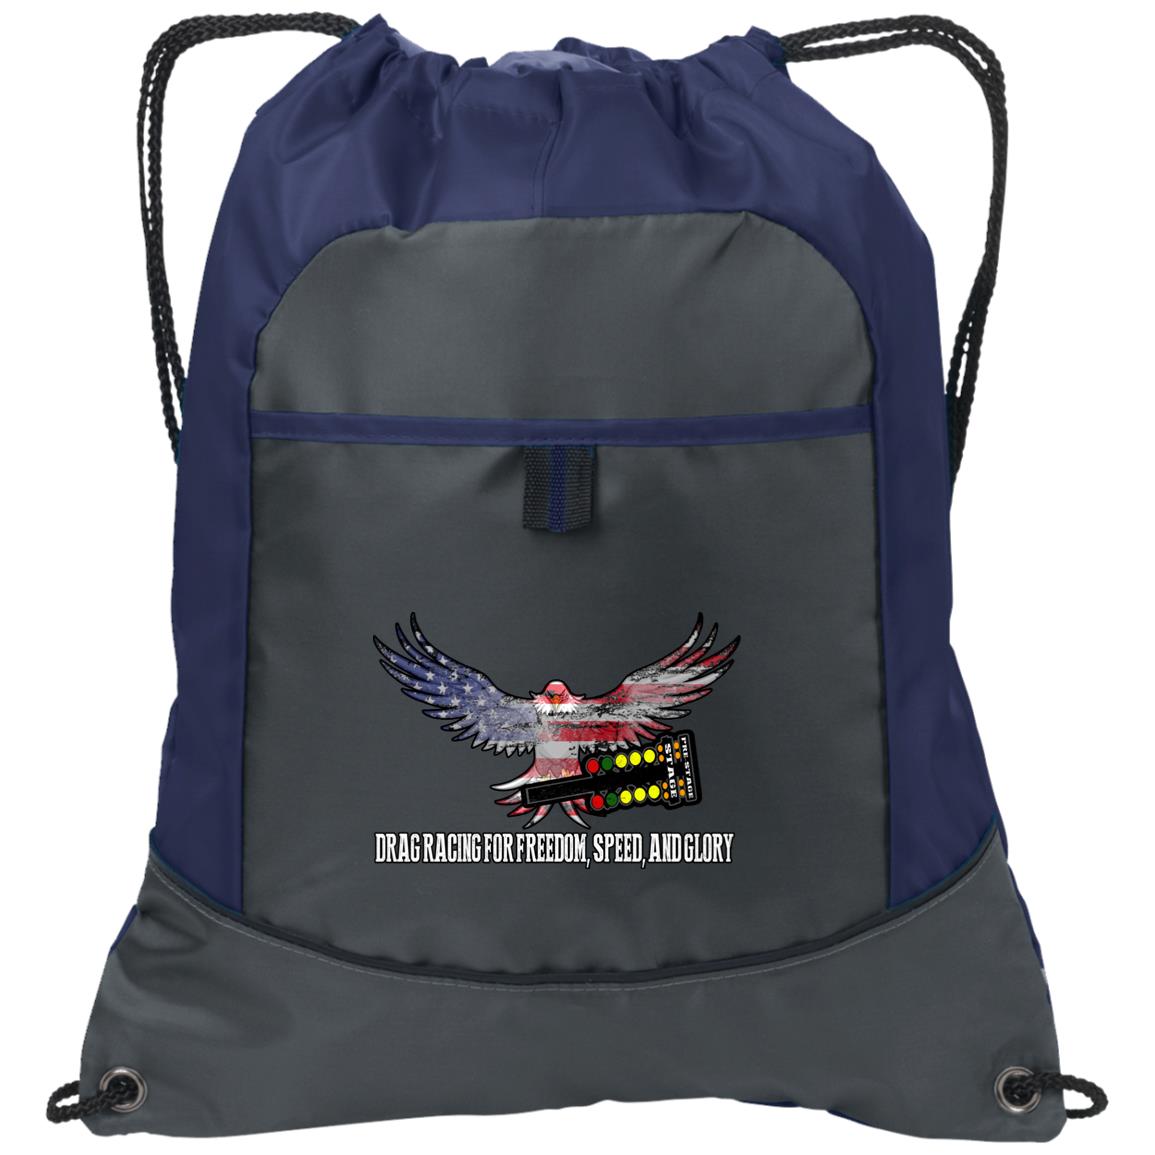 Drag Racing for Freedom, Speed, and Glory Pocket Cinch Pack